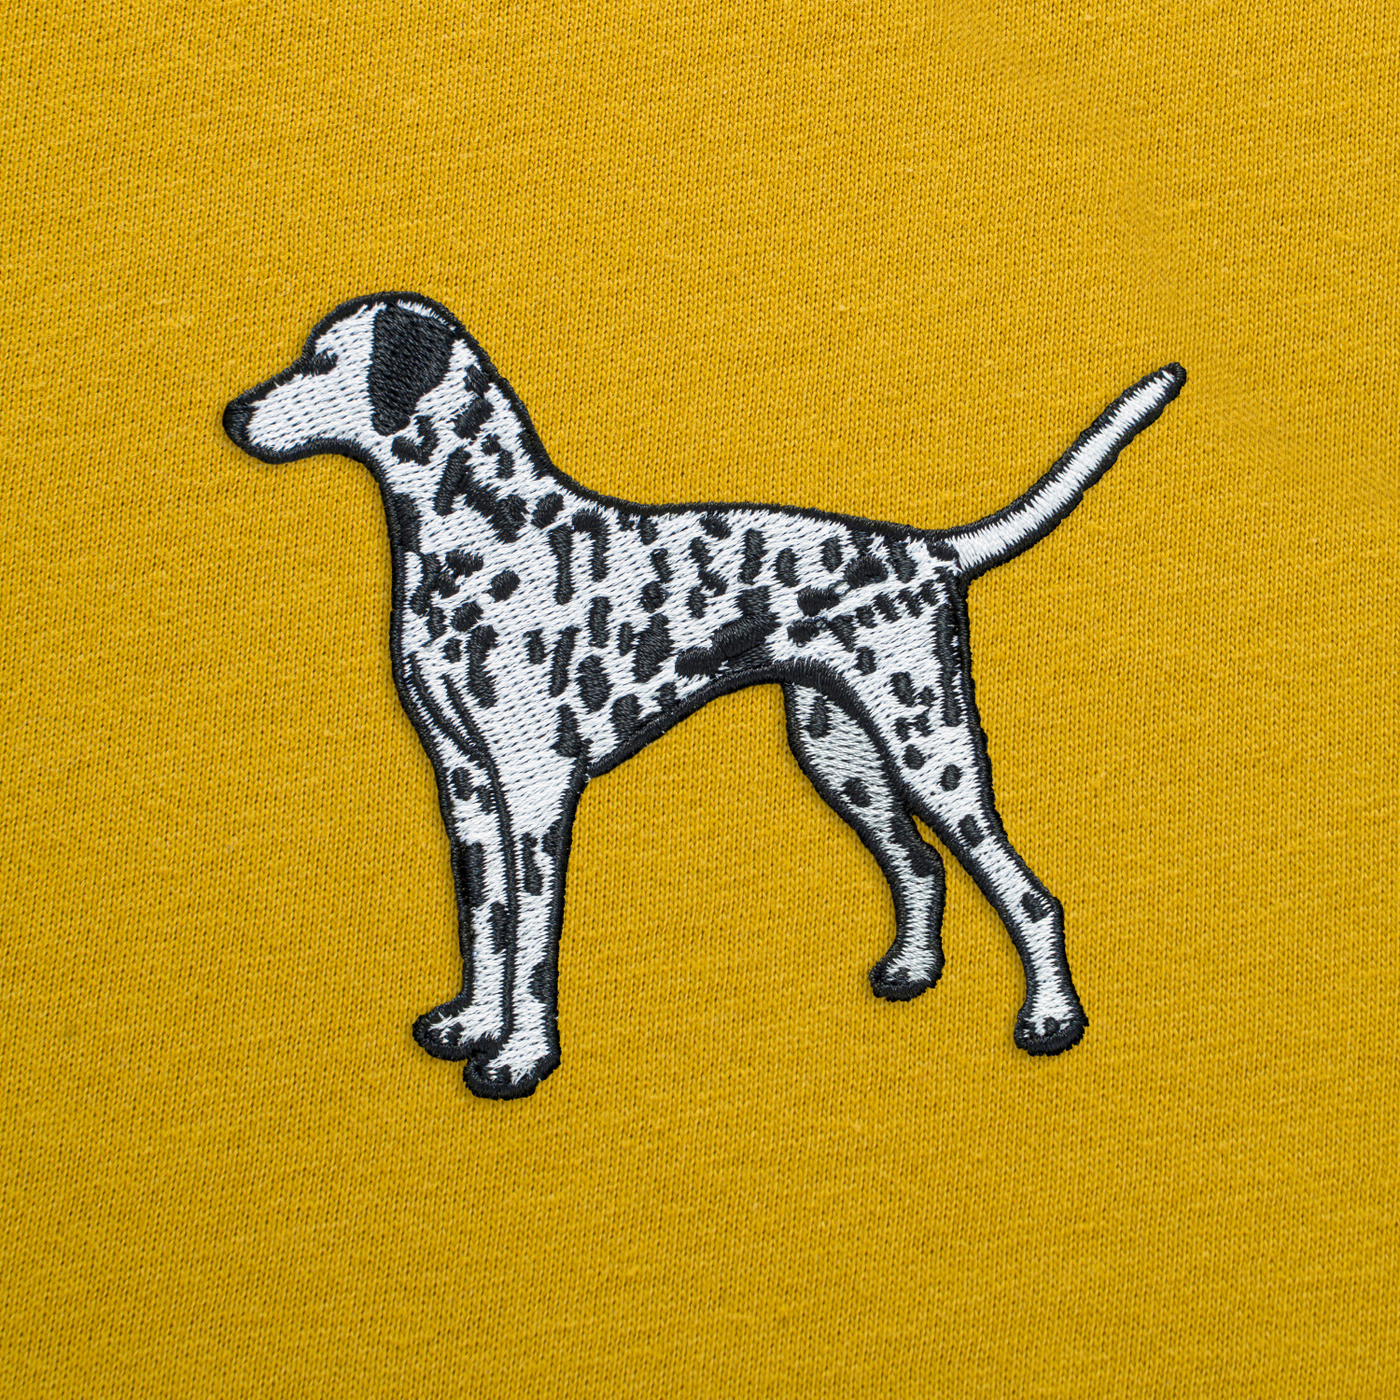 Bobby's Planet Men's Embroidered Dalmatian T-Shirt from Paws Dog Cat Animals Collection in Mustard Color#color_mustard